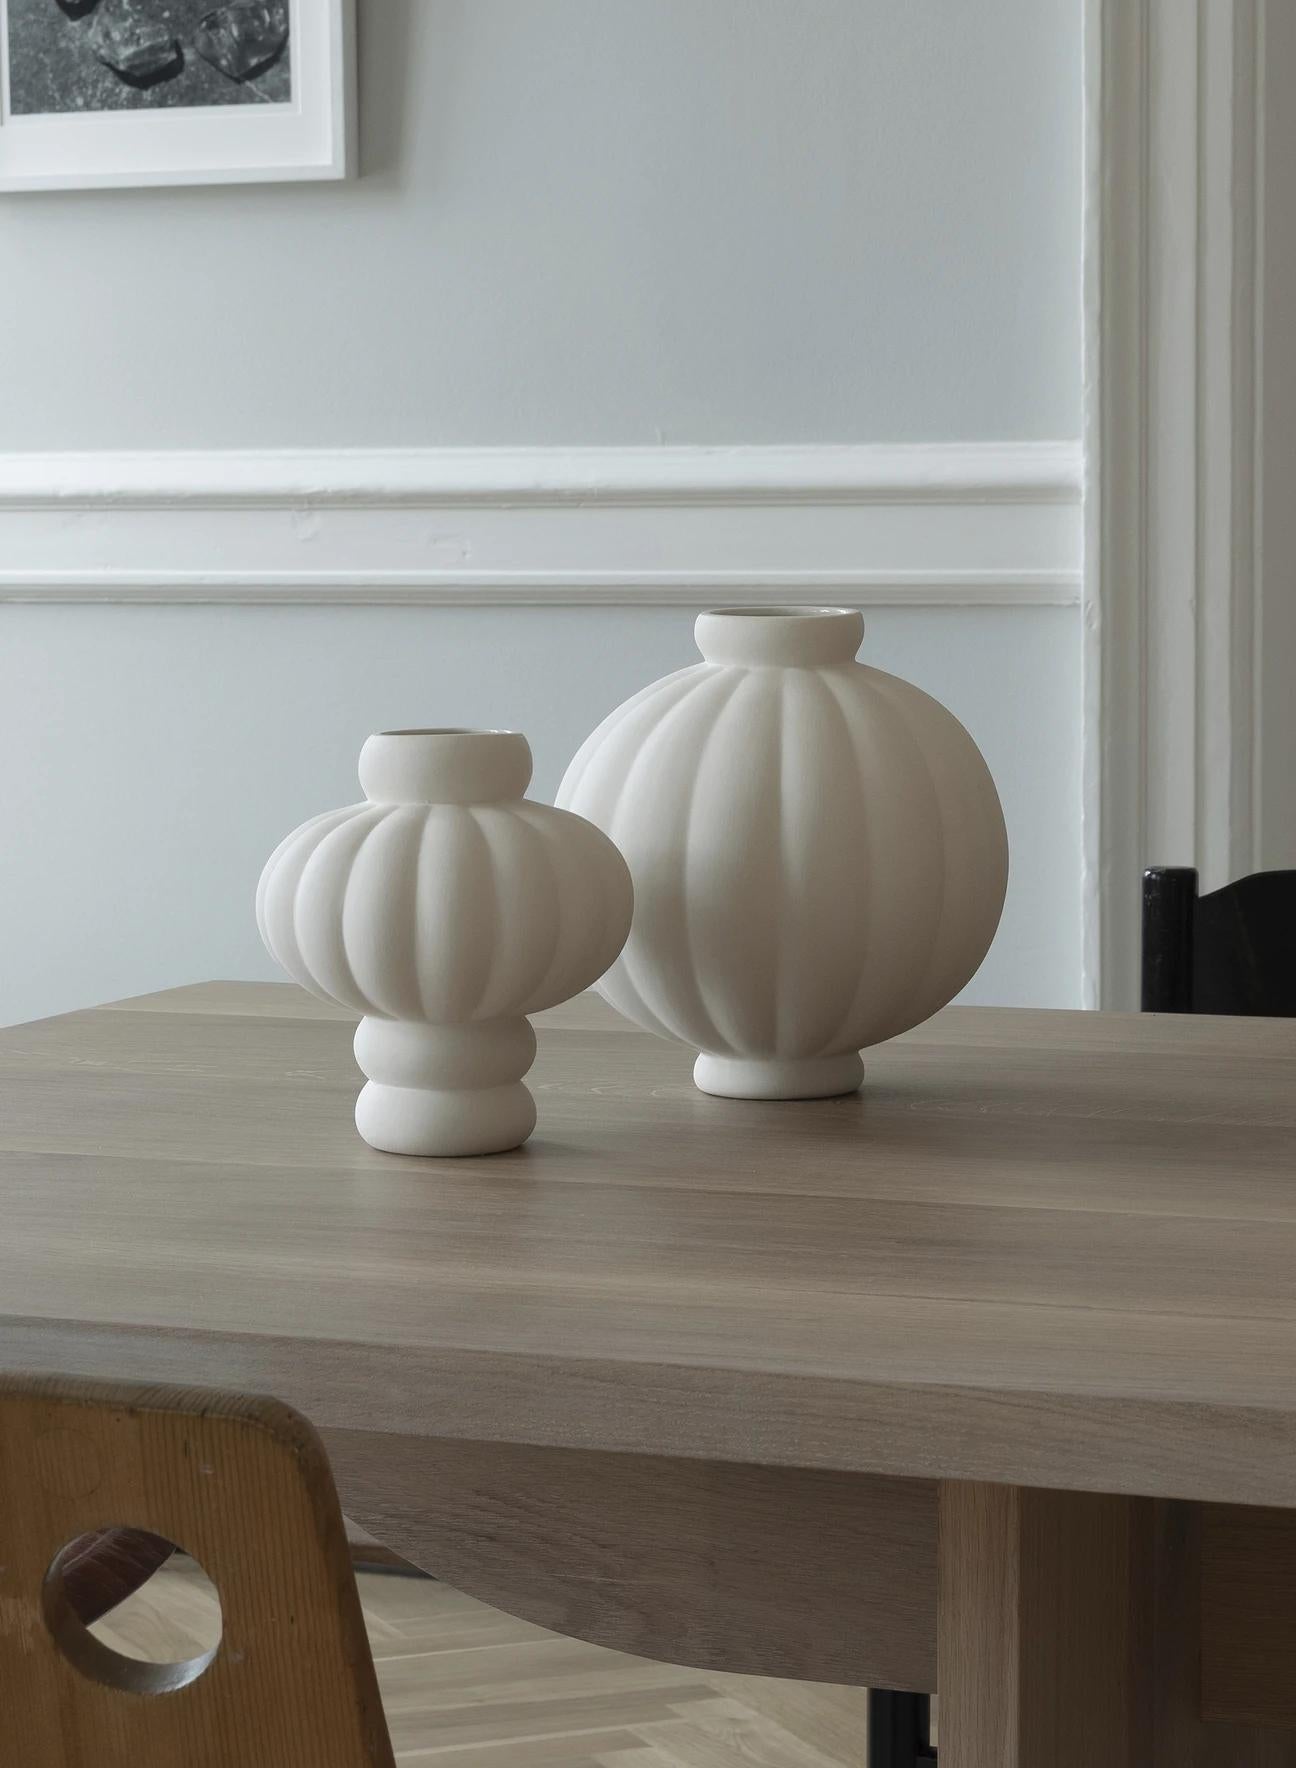 Balloon vase 03 Grey
Handmade ceramic vase made by Danish artist Louise Roe.

Measure: Ø 13-35 / H 40 cm

About the artist:
Louise Roe is a Copenhagen based interior design brand, established in 2010.
Each object is personally sketched by